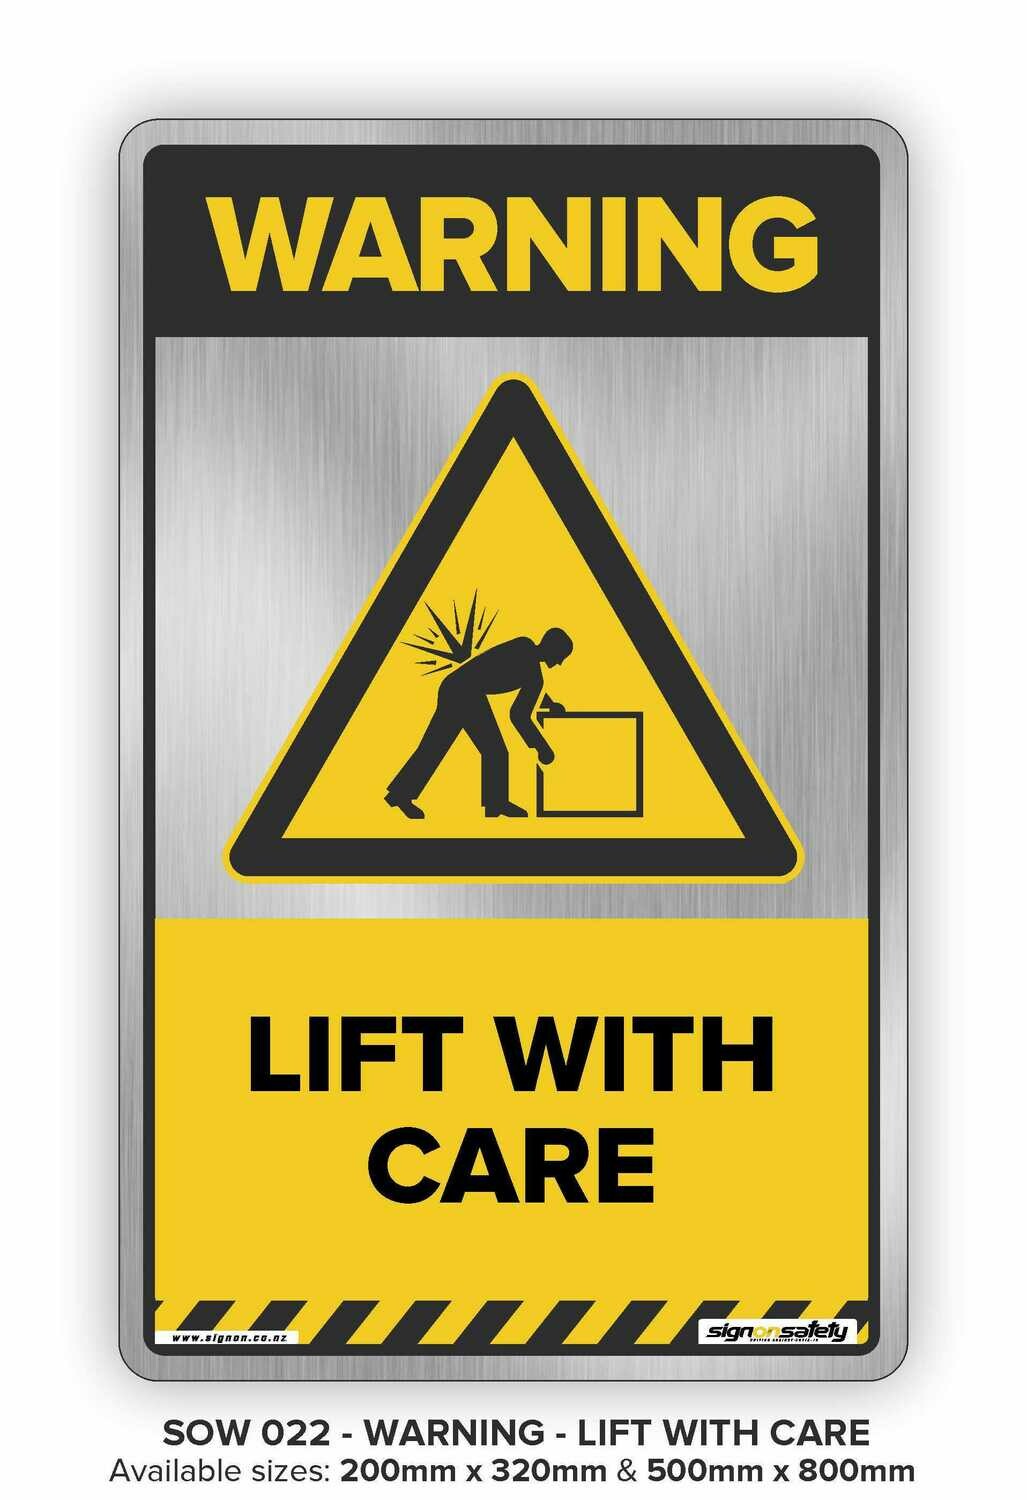 Warning - Lift With Care